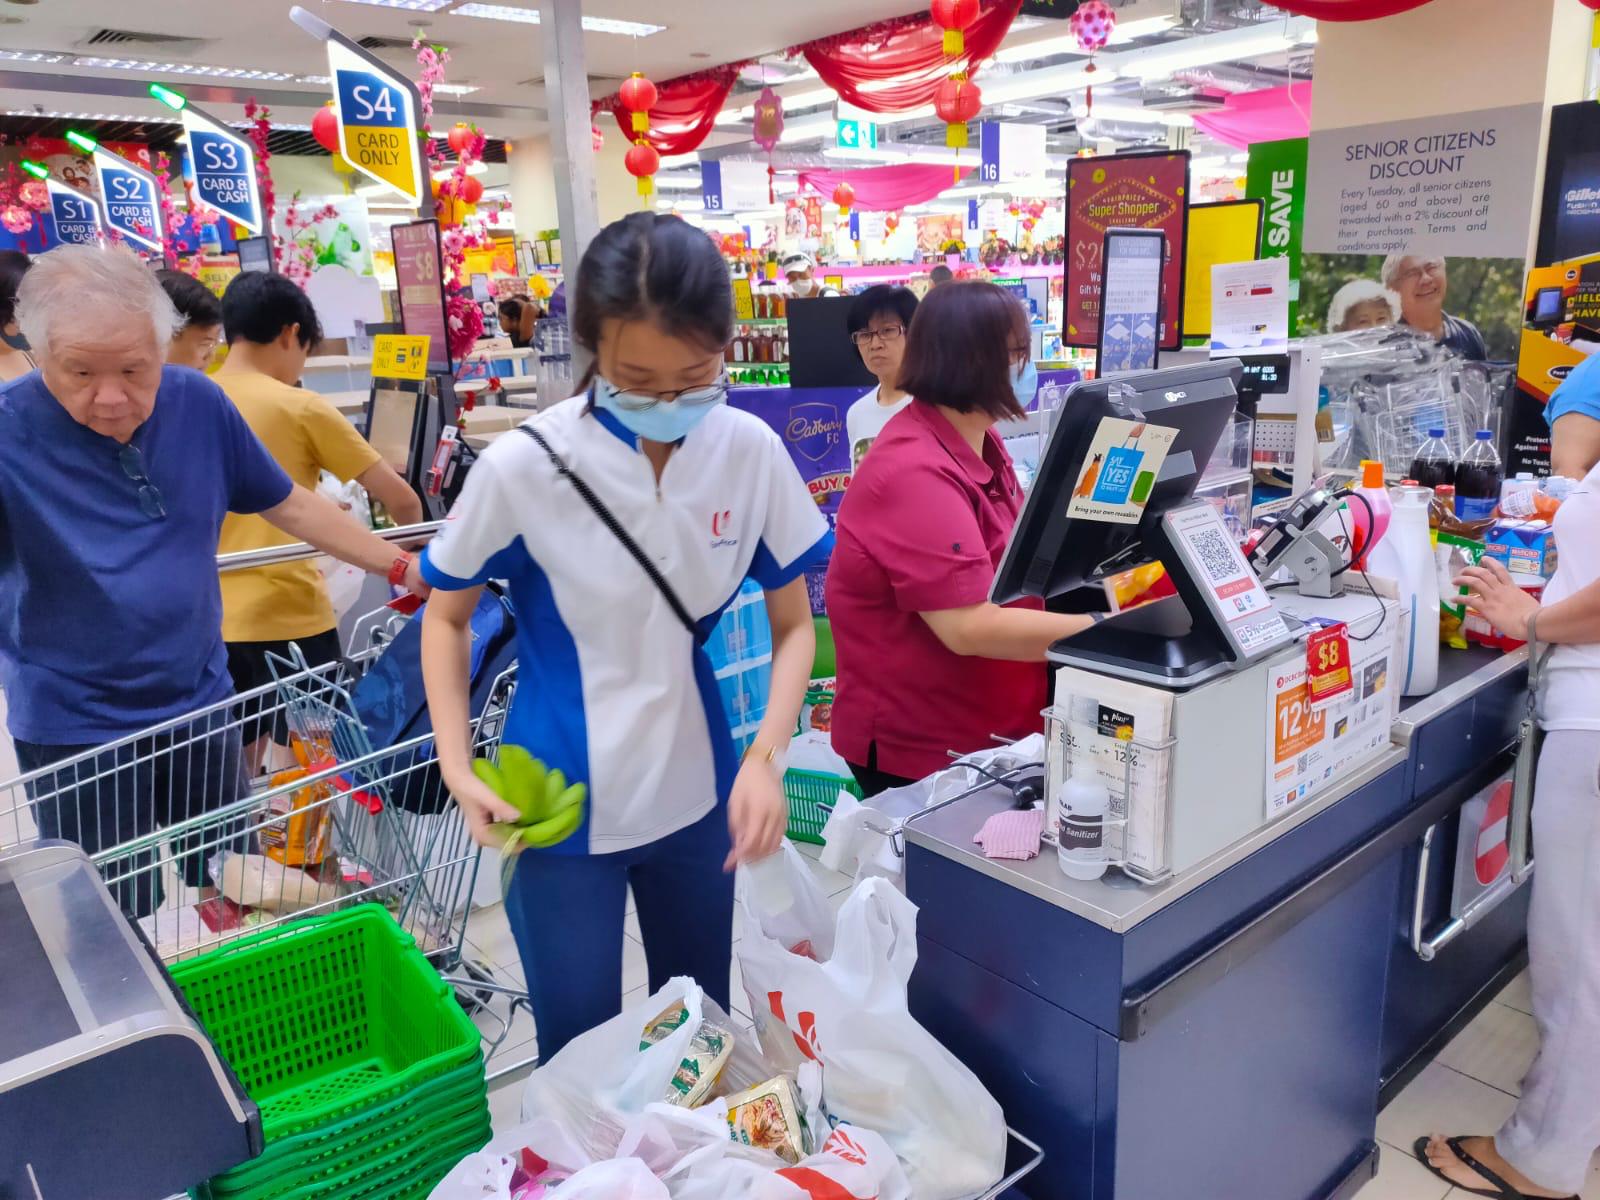 Shoppers paying for their groceries at an NTUC Fairprice supermarket outlet in a photo dated Feb. 10. Photo: NTUC Fairprice/Facebook